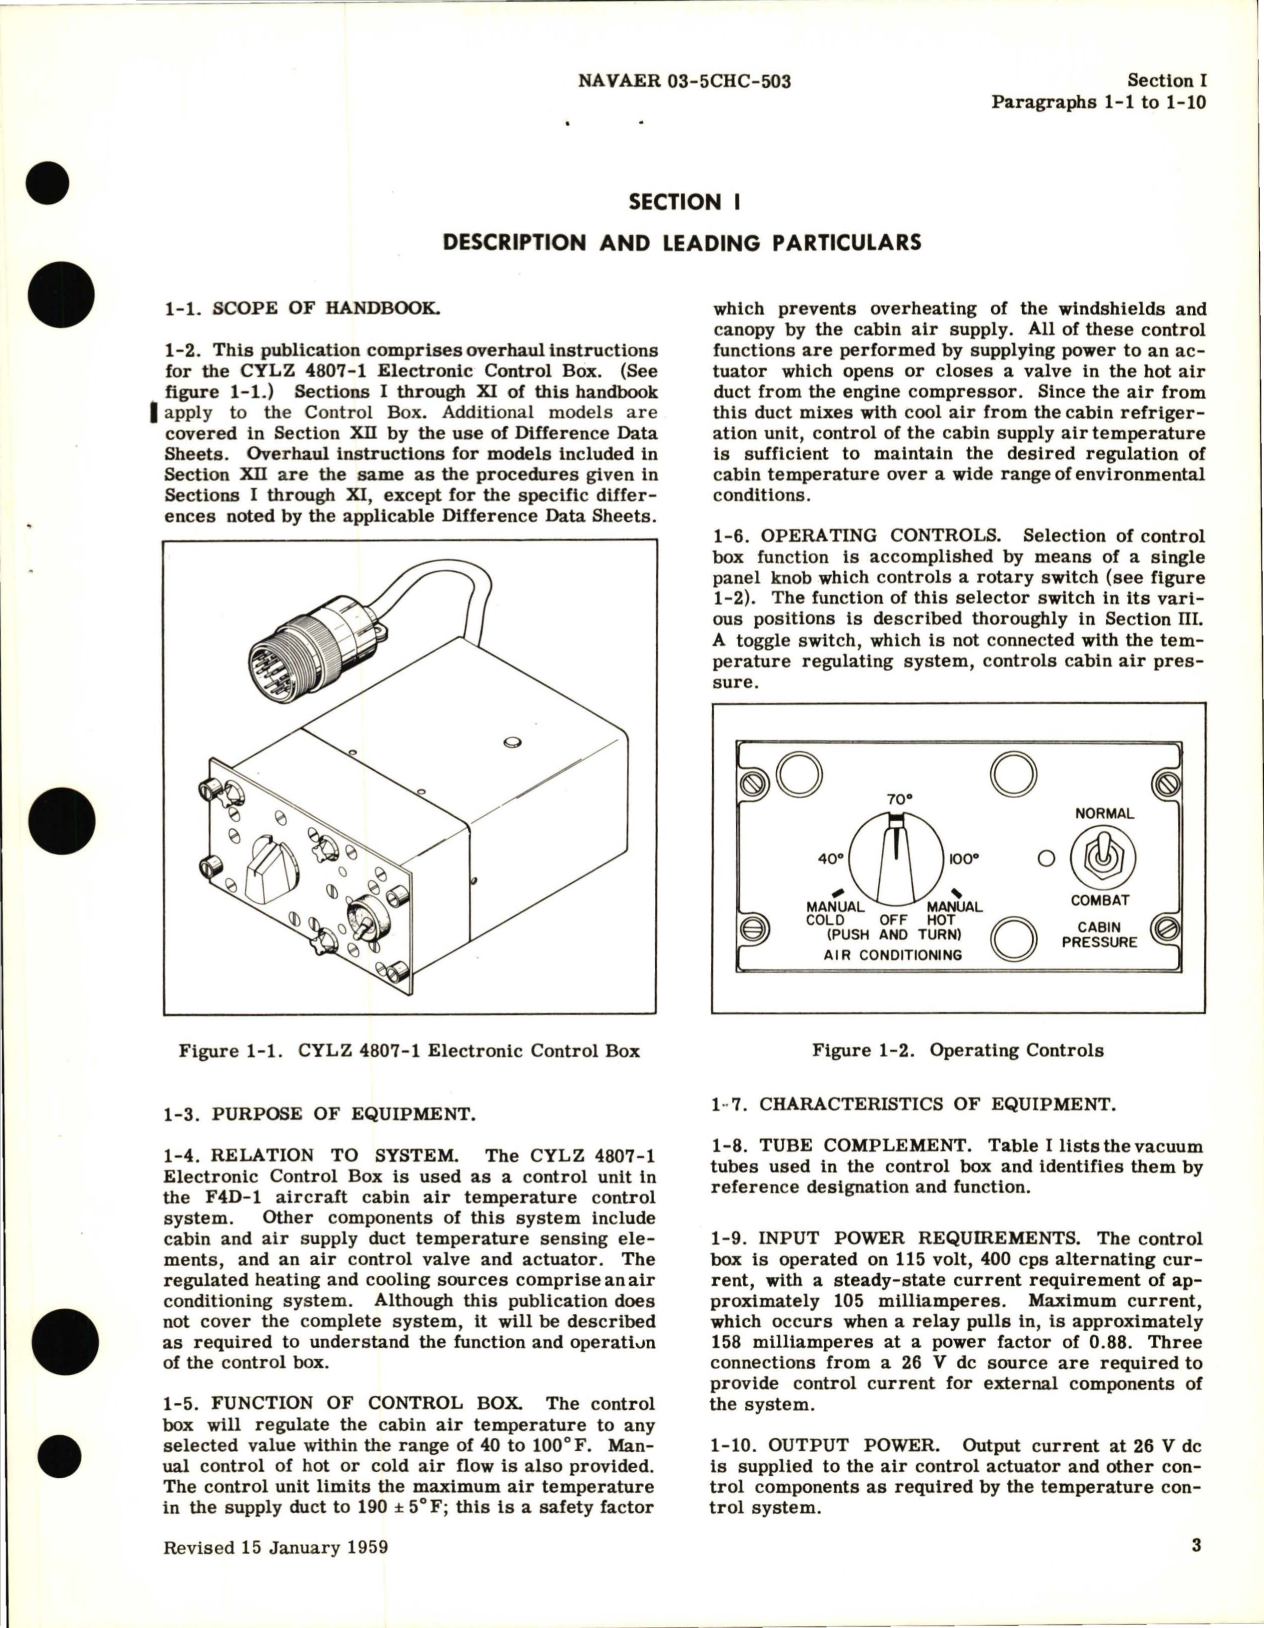 Sample page 5 from AirCorps Library document: Overhaul Instructions for Electronic Control Box - CYLZ 4807-1 and CYLZ 4807-2